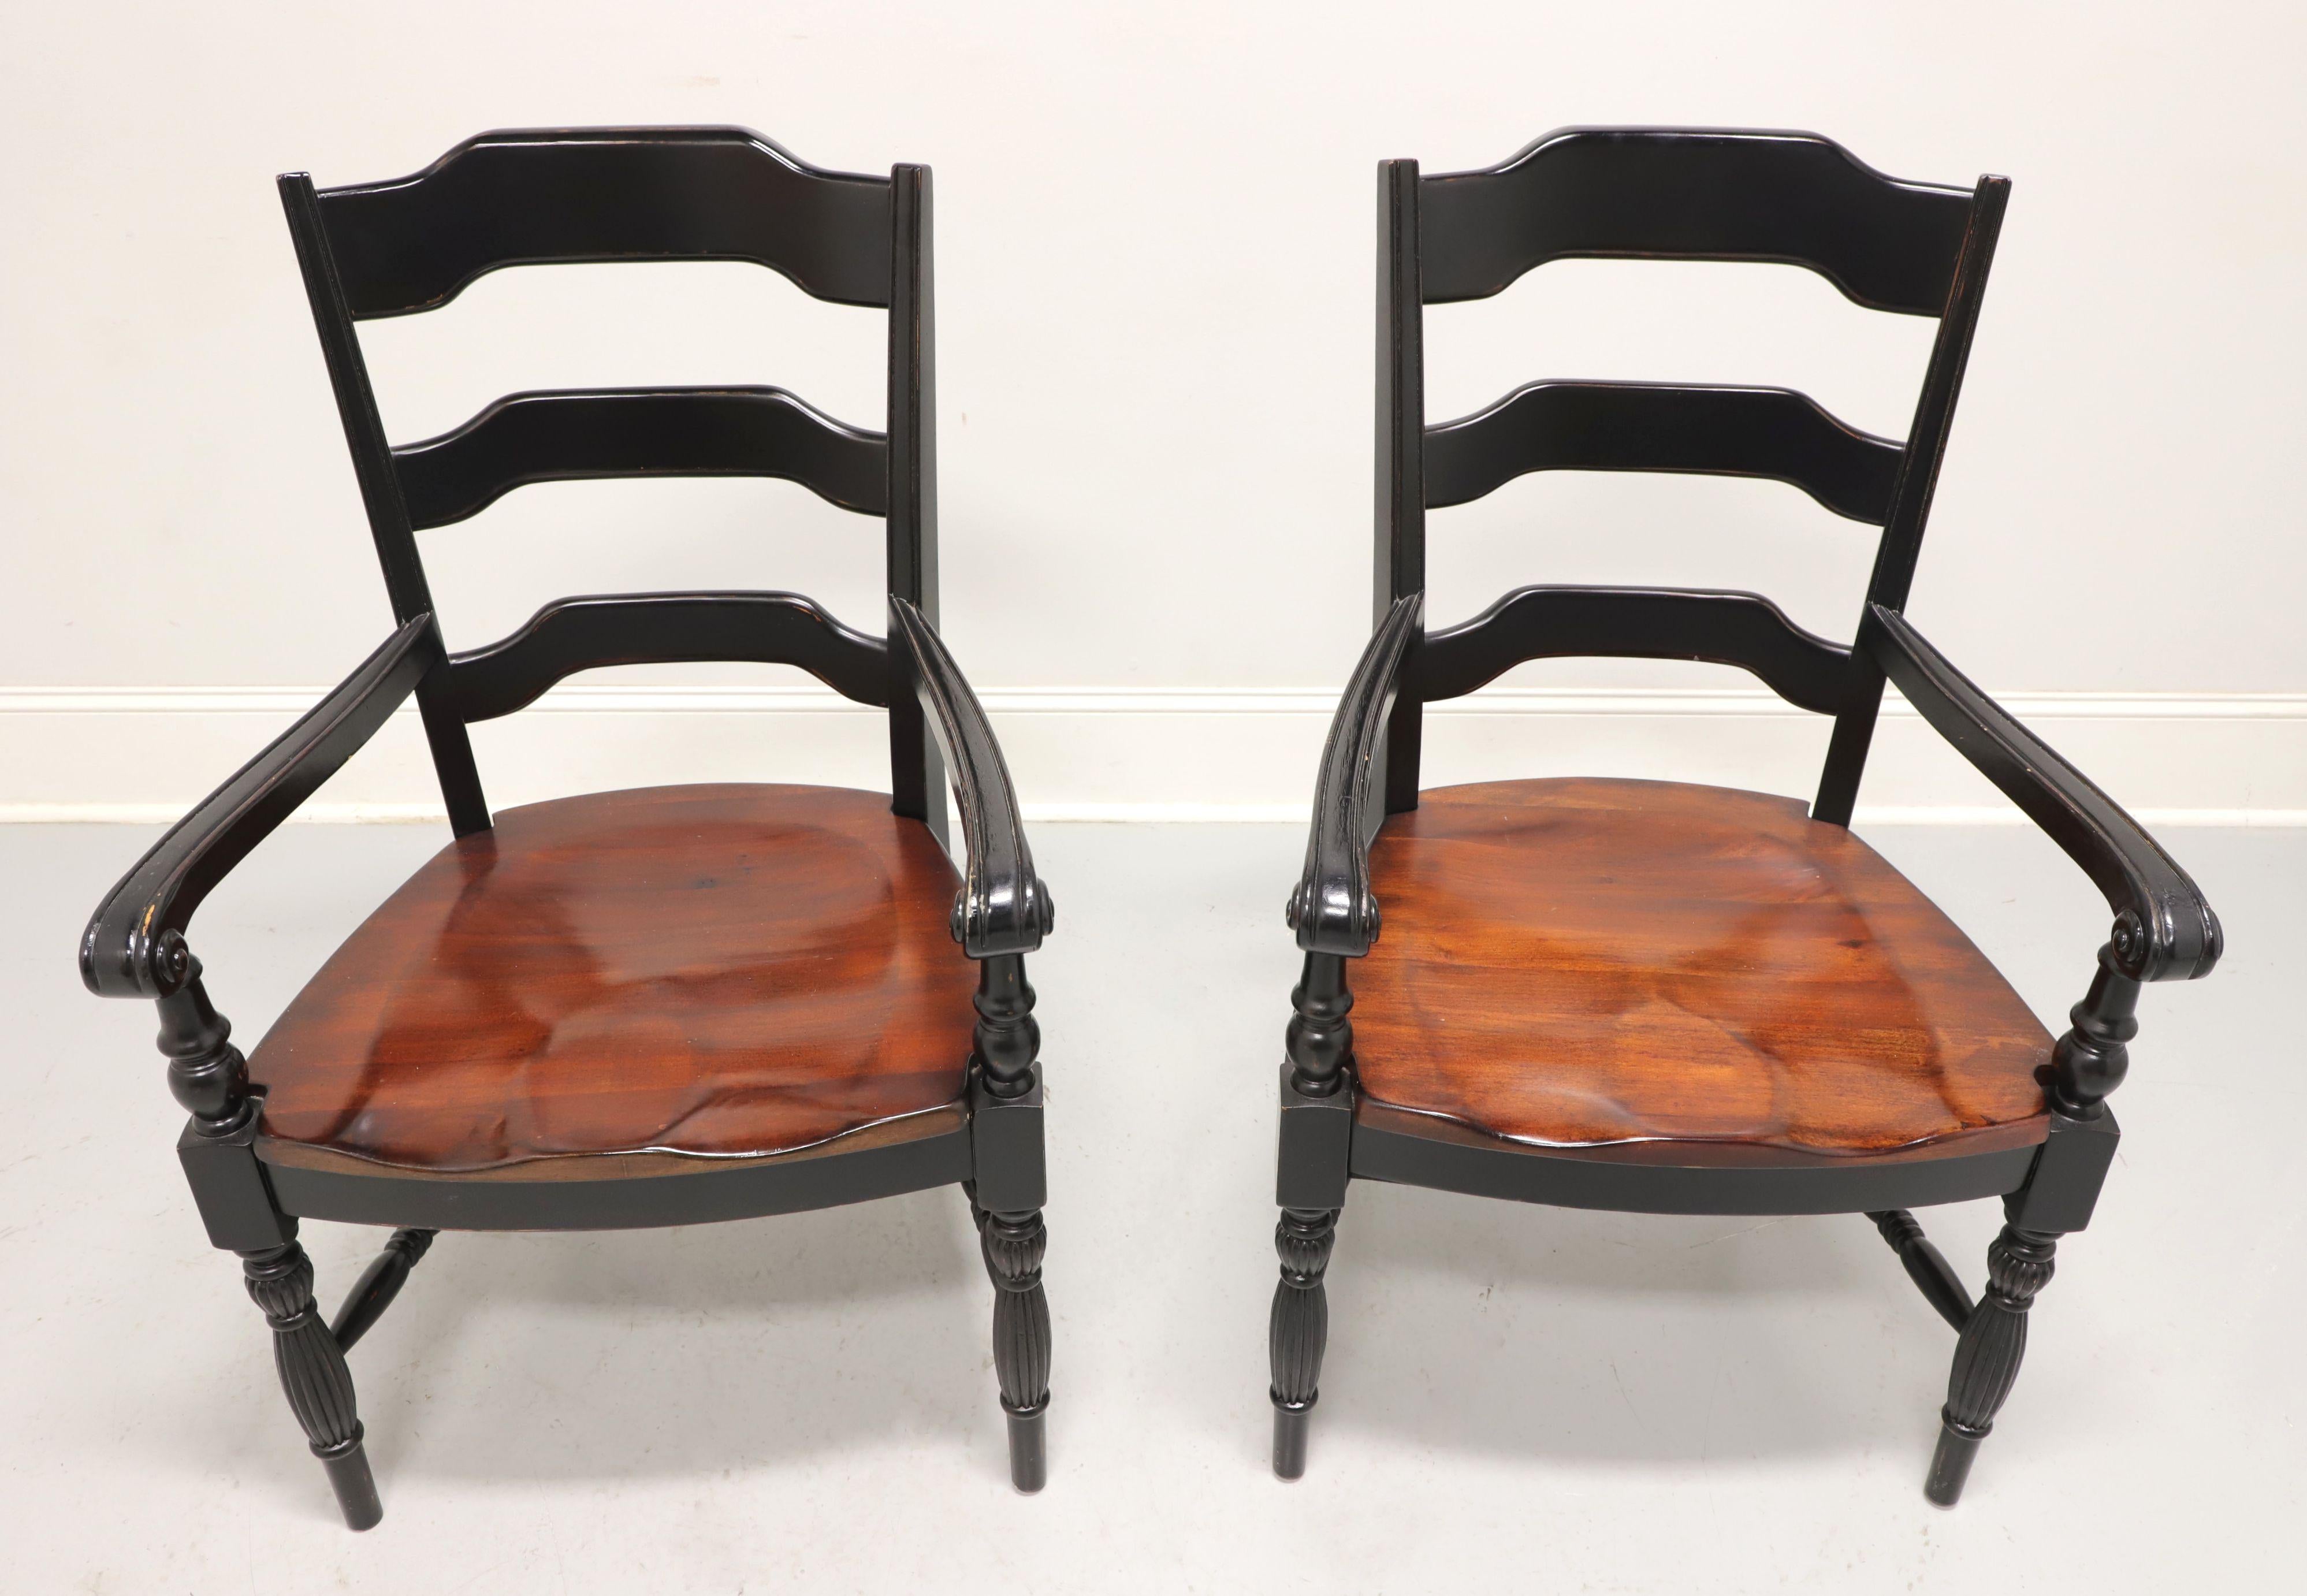 A pair of Cottage / Farmhouse style dining armchairs, unbranded. Hardwood with a distressed black painted finish, carved ladder backs, curved arms with turned supports, natural cherry saddle seats, turned & fluted legs and turned stretchers. Made in